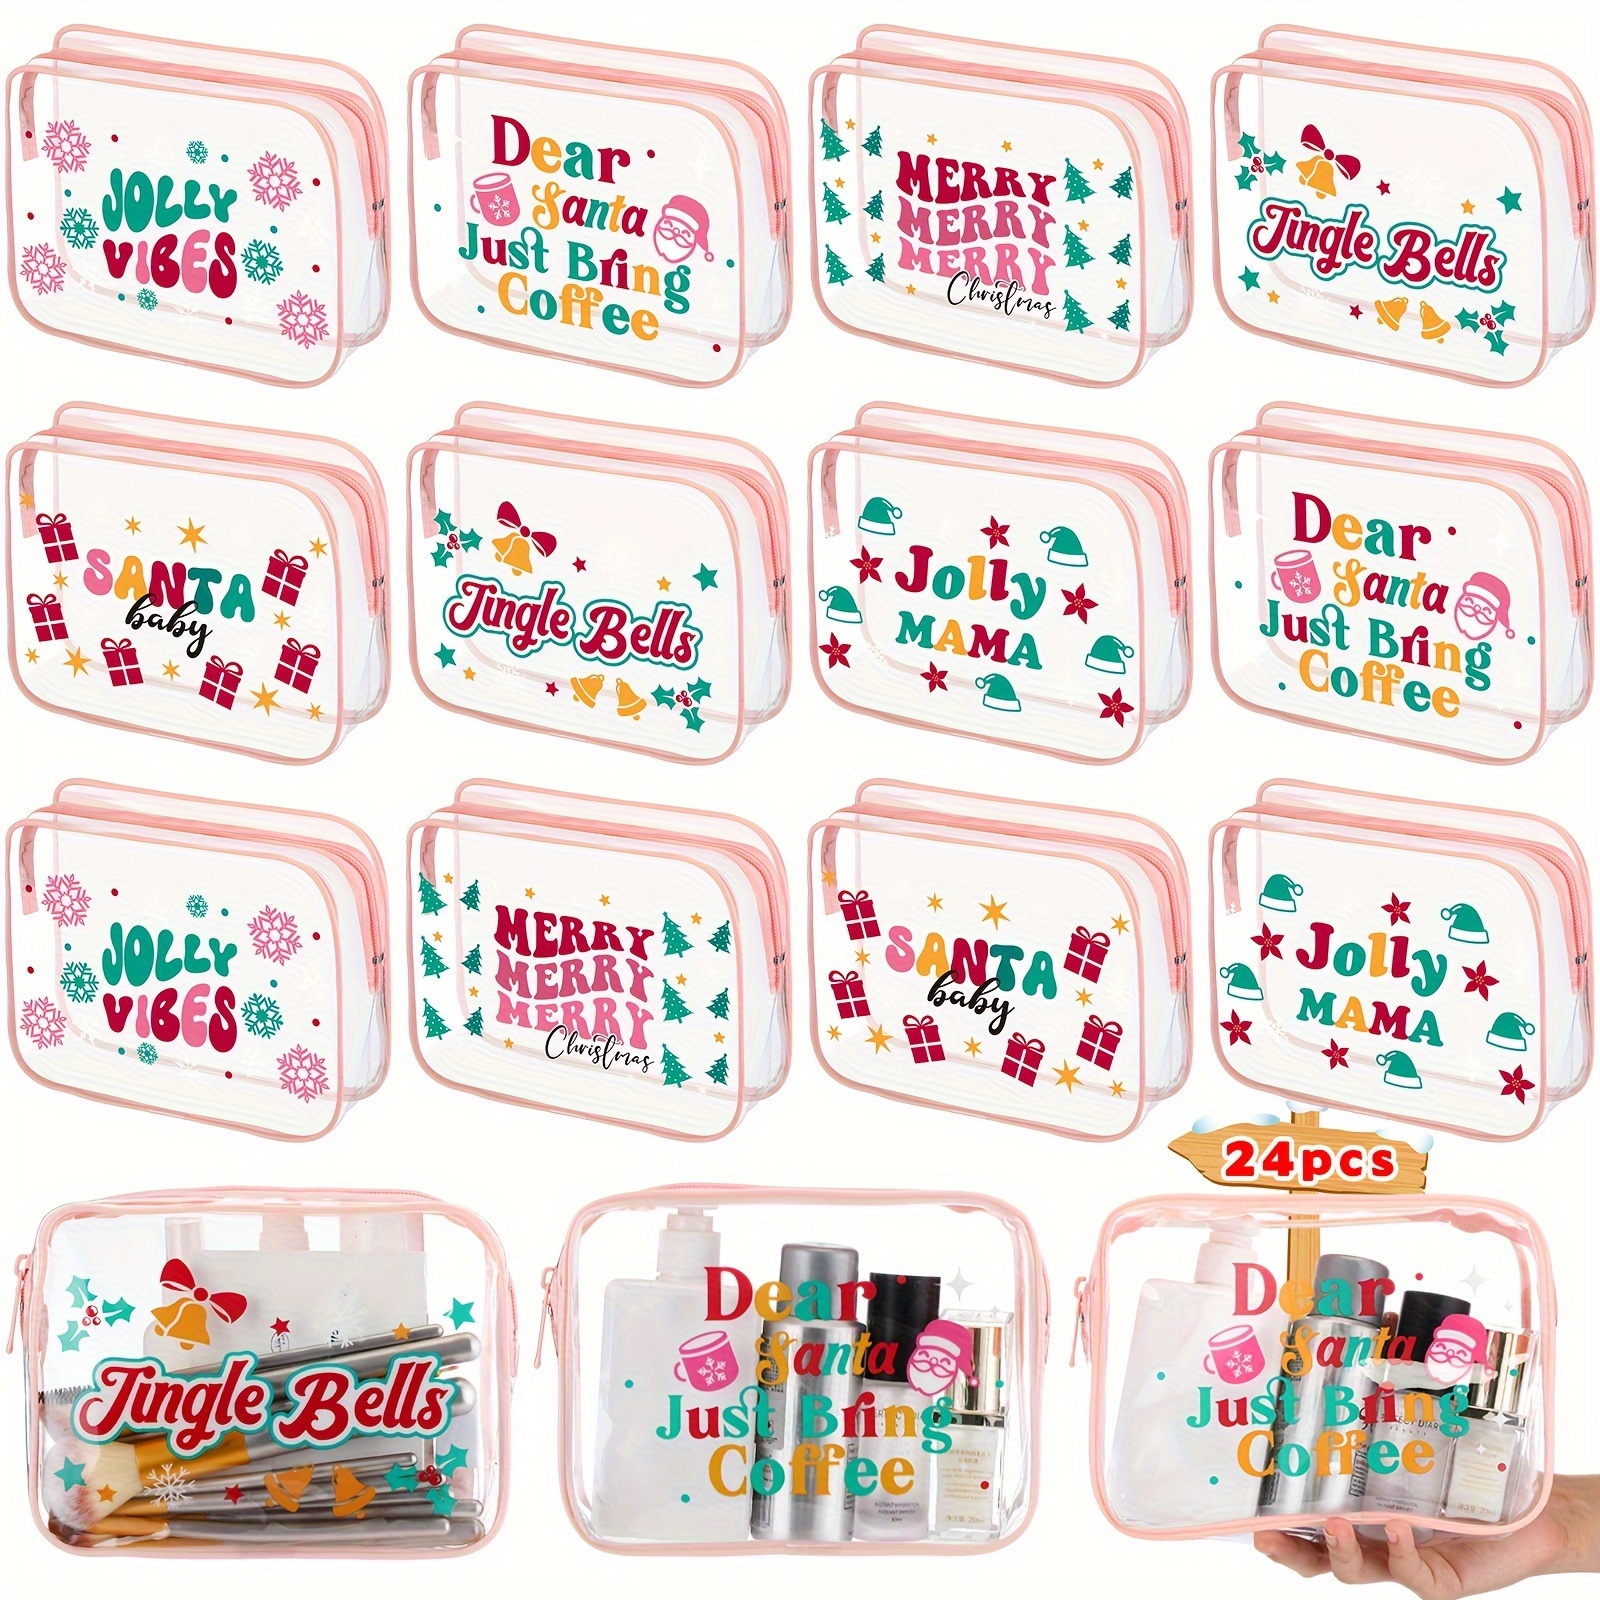 

24 Pcs Christmas Makeup Bags Bulk Xmas Clear Waterproof Toiletry Bags With Zipper Pvc Cosmetic Bags Multipurpose Travel Pouch Organizer Holiday Gift For Family Friends Schoolmates, 6 Style